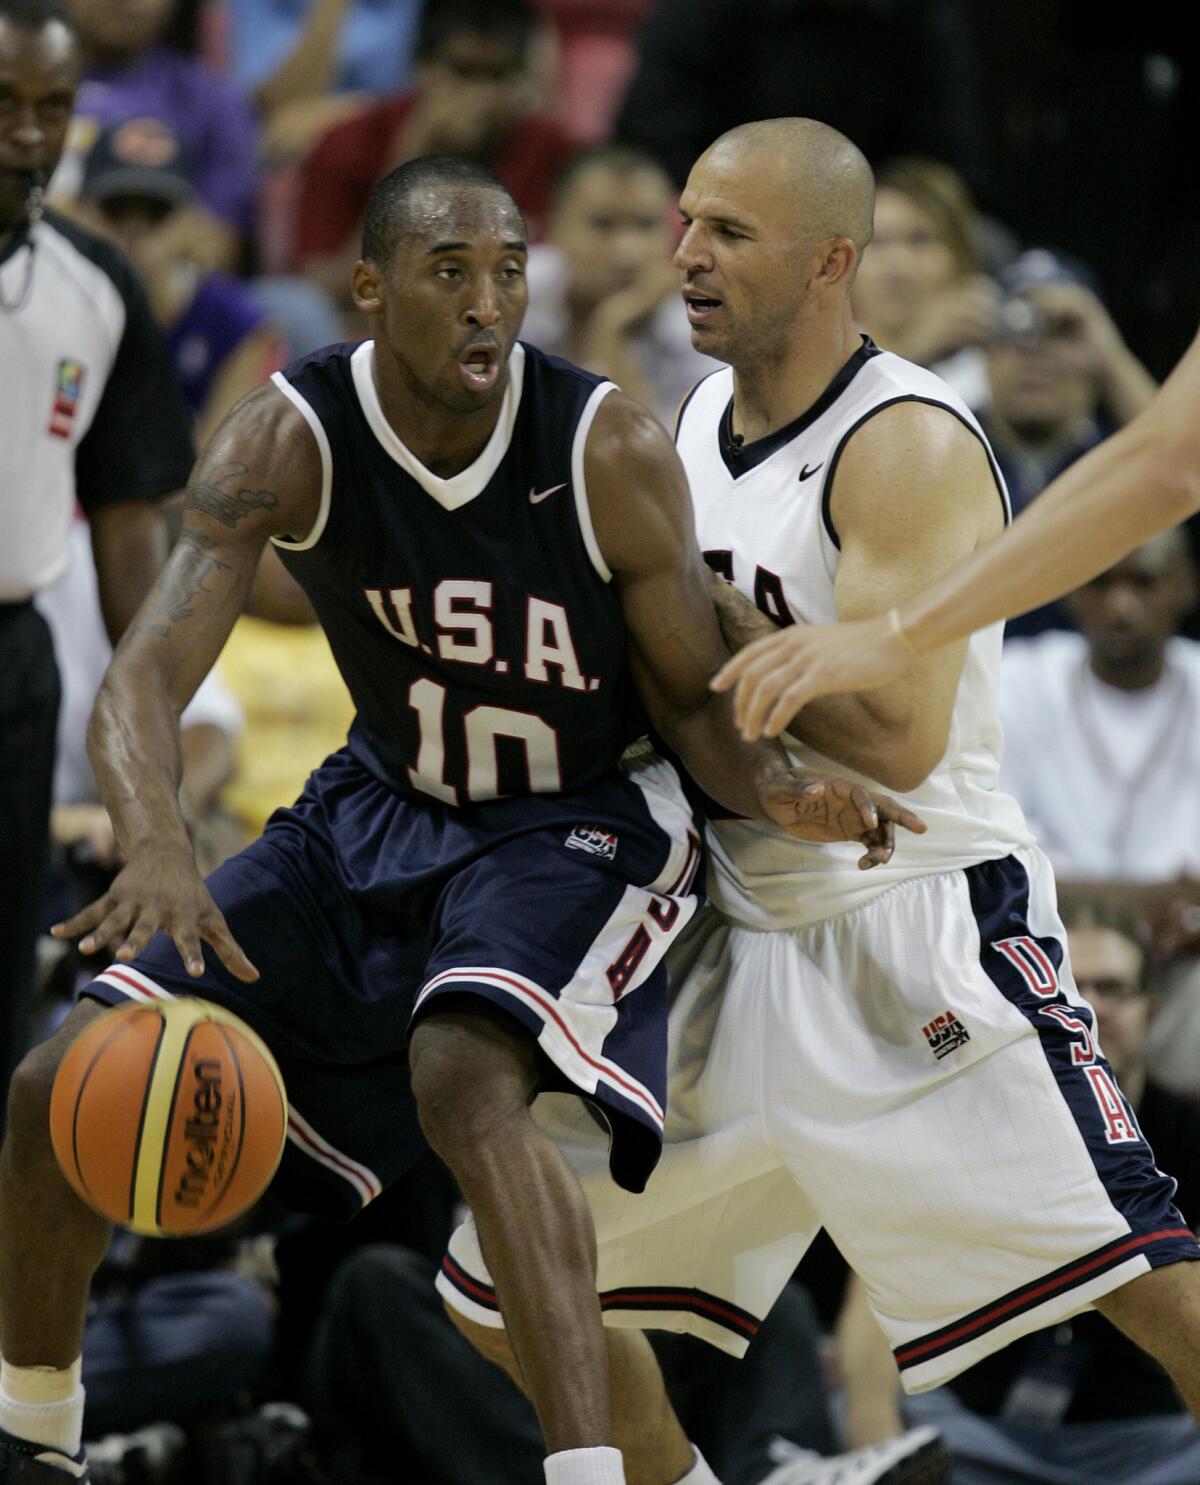 Jason Kidd pressures Kobe Bryant during an Olympic basketball team practice in 2007. (Jae C. Hong / Associated Press) Kobe Bryant makes the last shot of the game over the New Jersey Nets Jason Kidd. (Los Angeles Times)